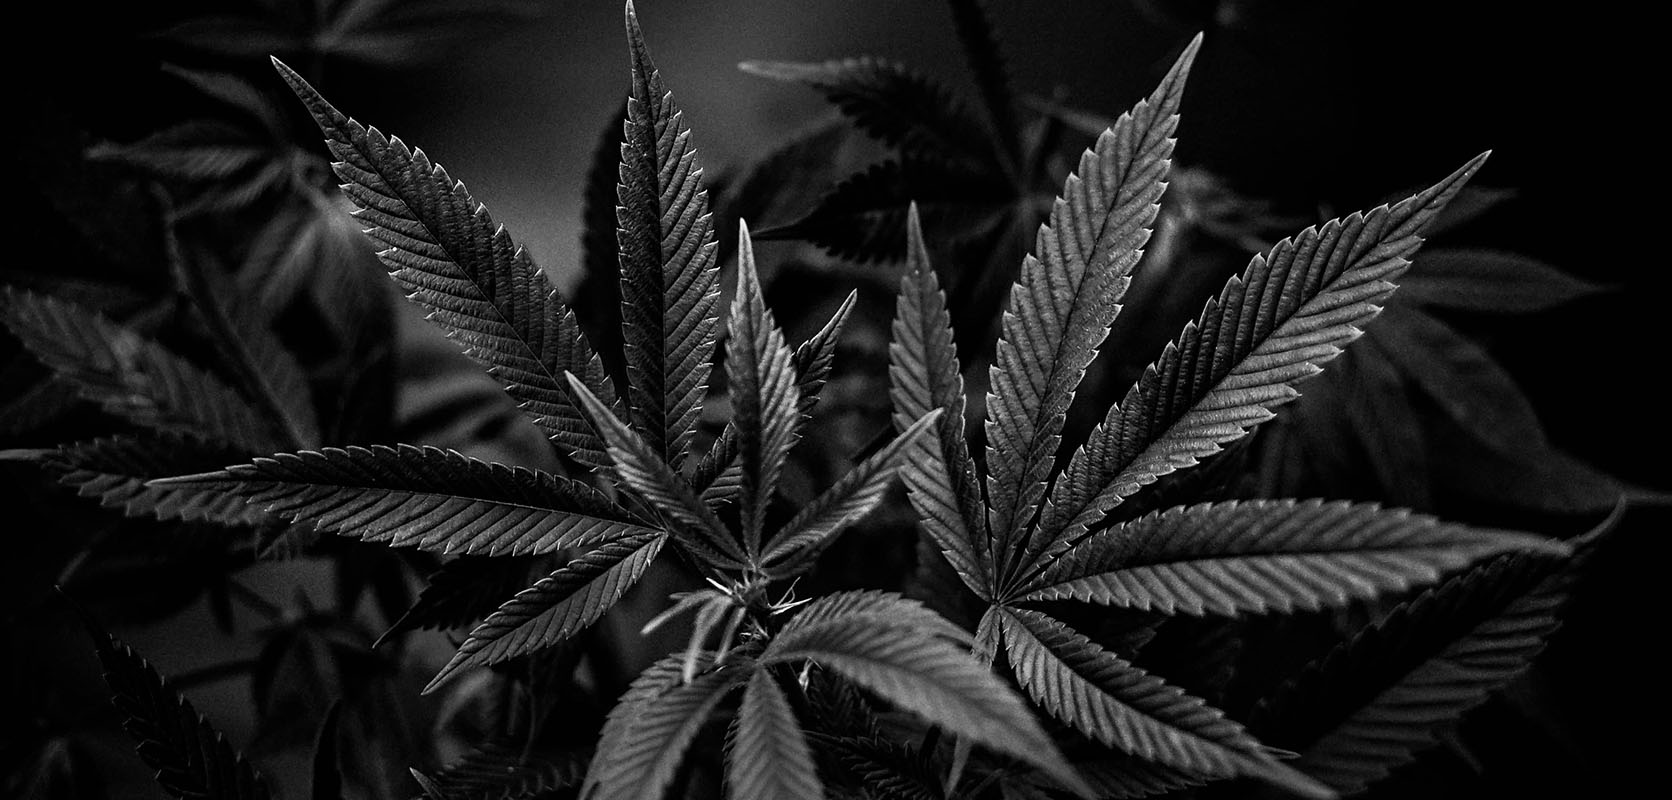 black and white photo of cannabis leaves. Buy weed online canada with cheap ounces for sale at low price bud online dispensary.